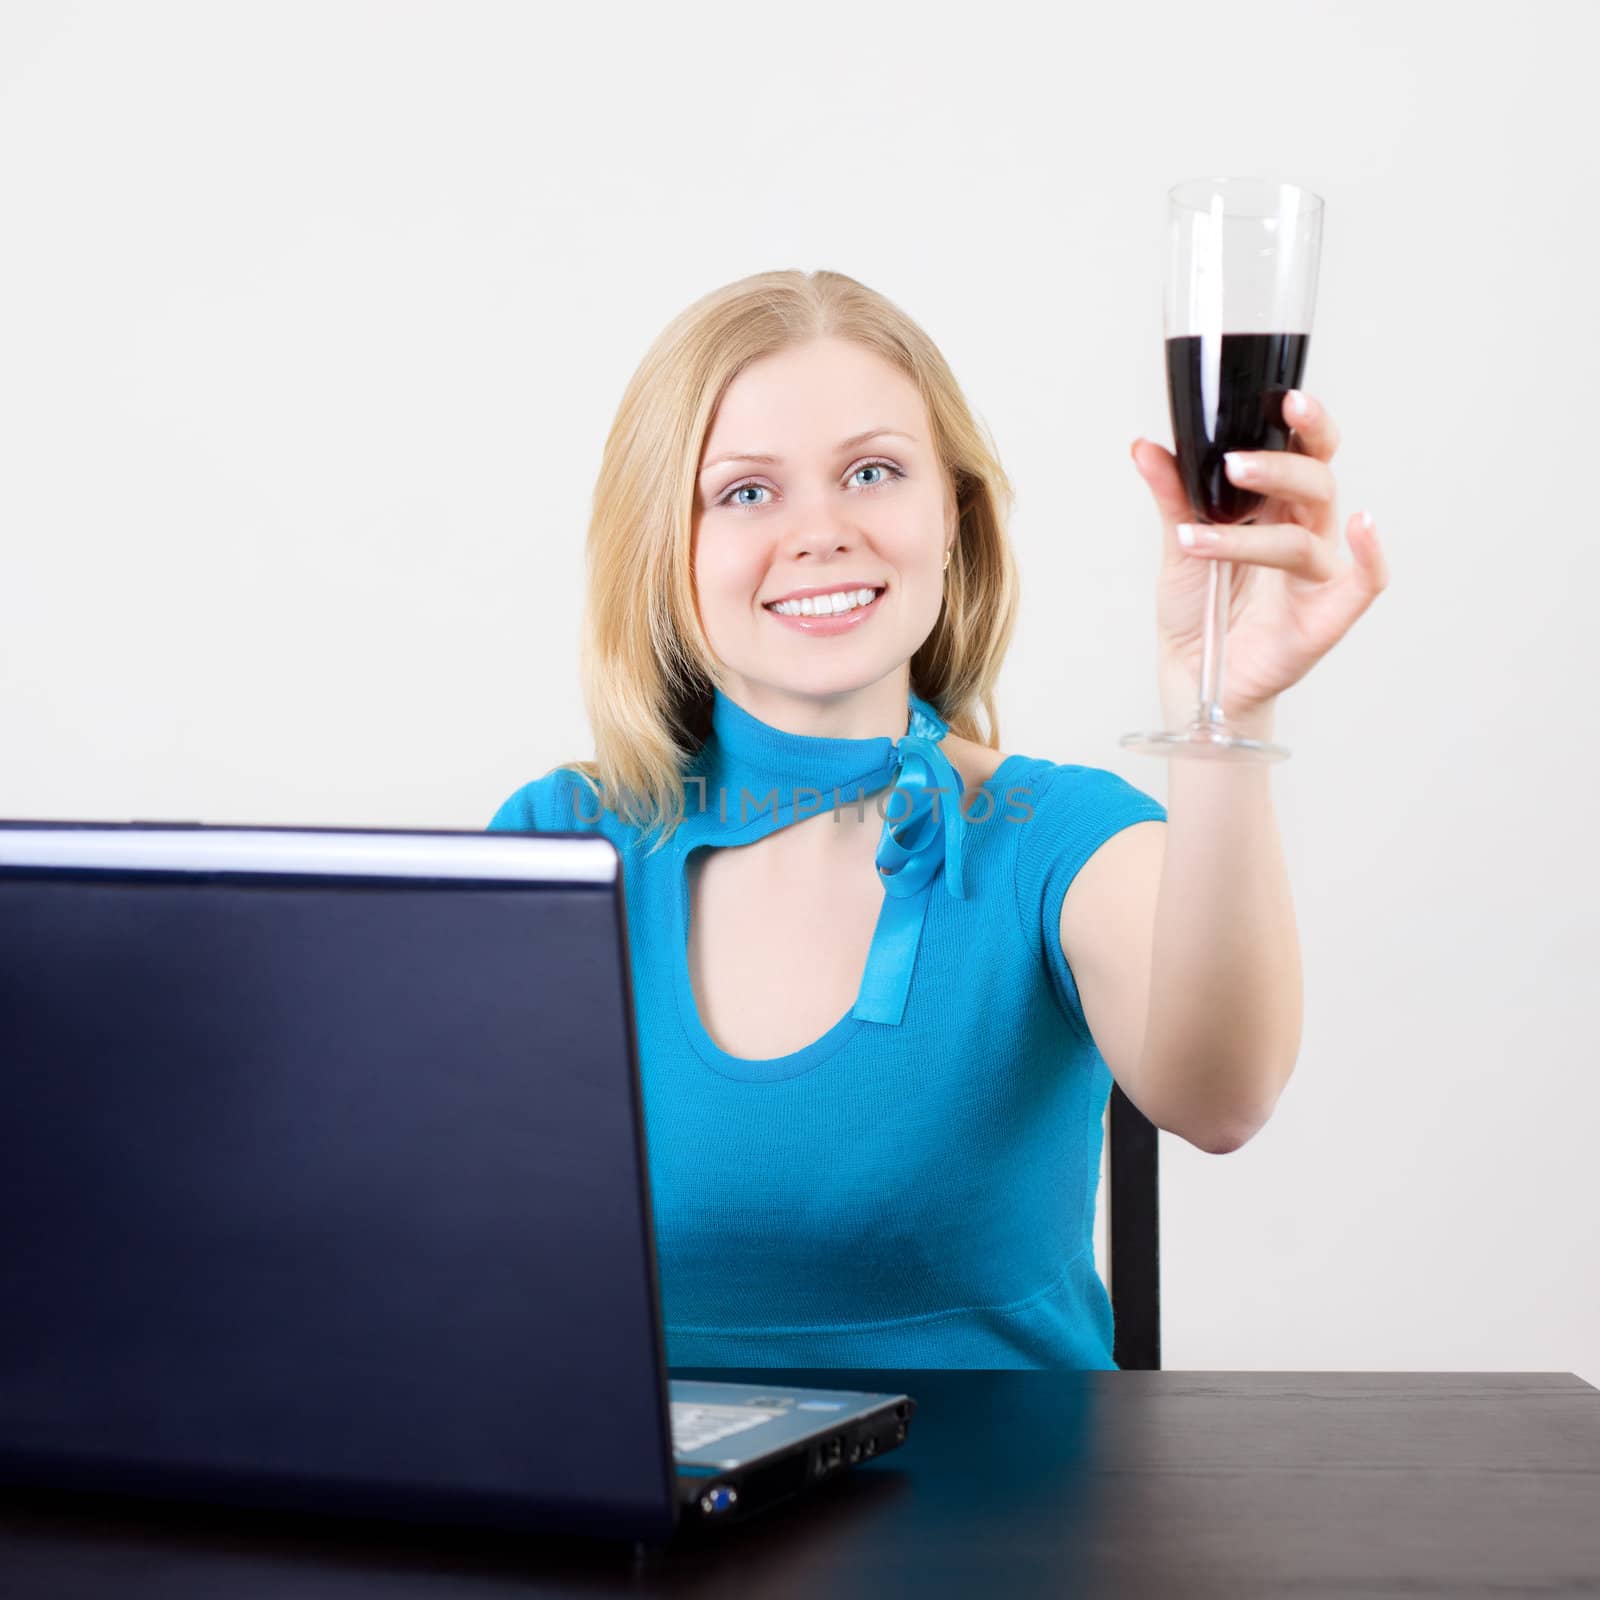 business woman celebrating her success with wine in front of her computer